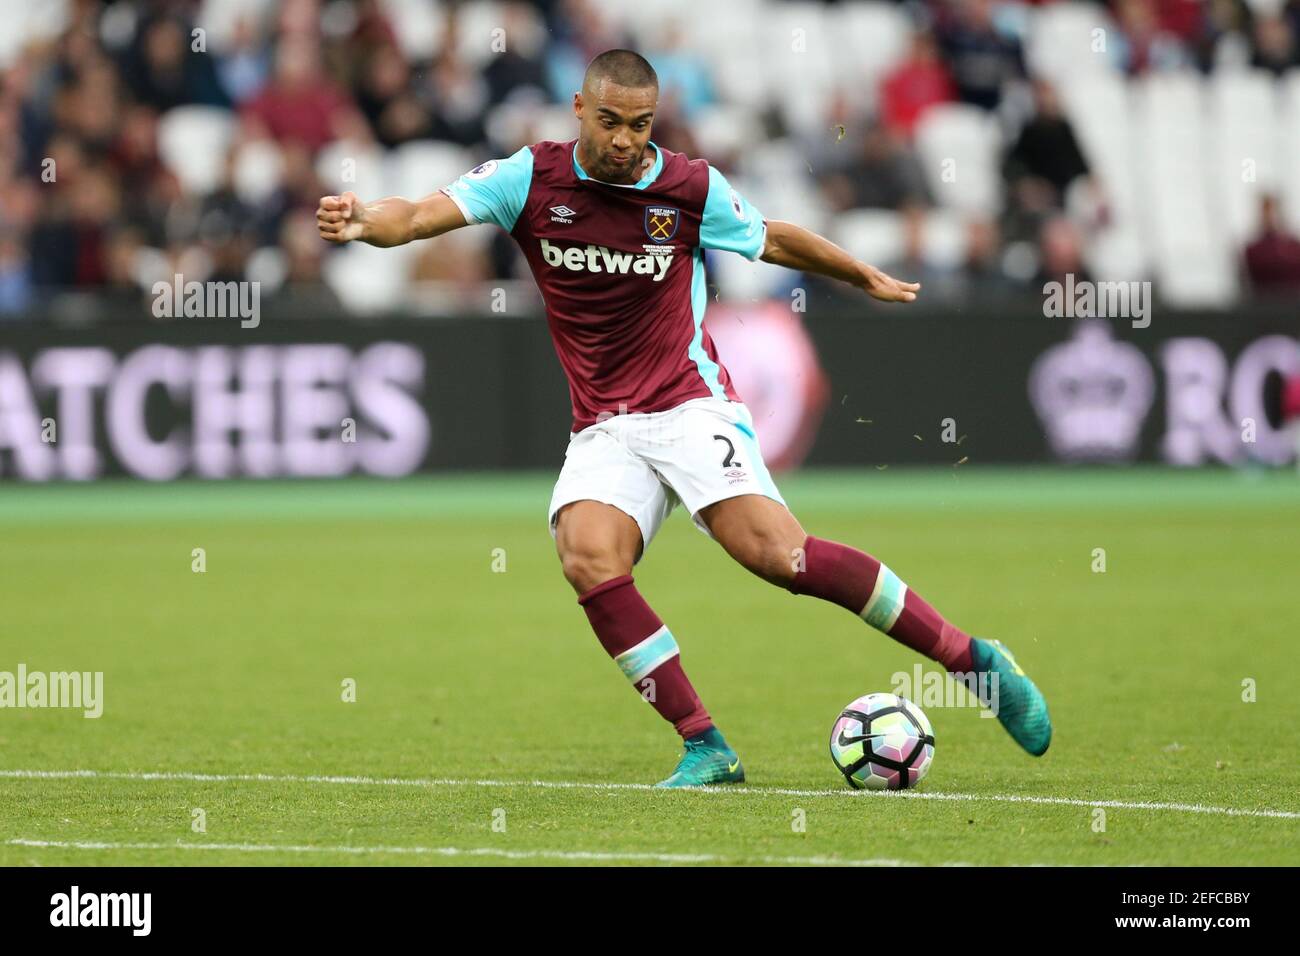 Britain Soccer Football - West Ham United v Sunderland - Premier League - London Stadium - 22/10/16 West Ham United's Winston Reid scores their first goal  Reuters / Paul Hackett Livepic EDITORIAL USE ONLY. No use with unauthorized audio, video, data, fixture lists, club/league logos or 'live' services. Online in-match use limited to 45 images, no video emulation. No use in betting, games or single club/league/player publications.  Please contact your account representative for further details. Stock Photo